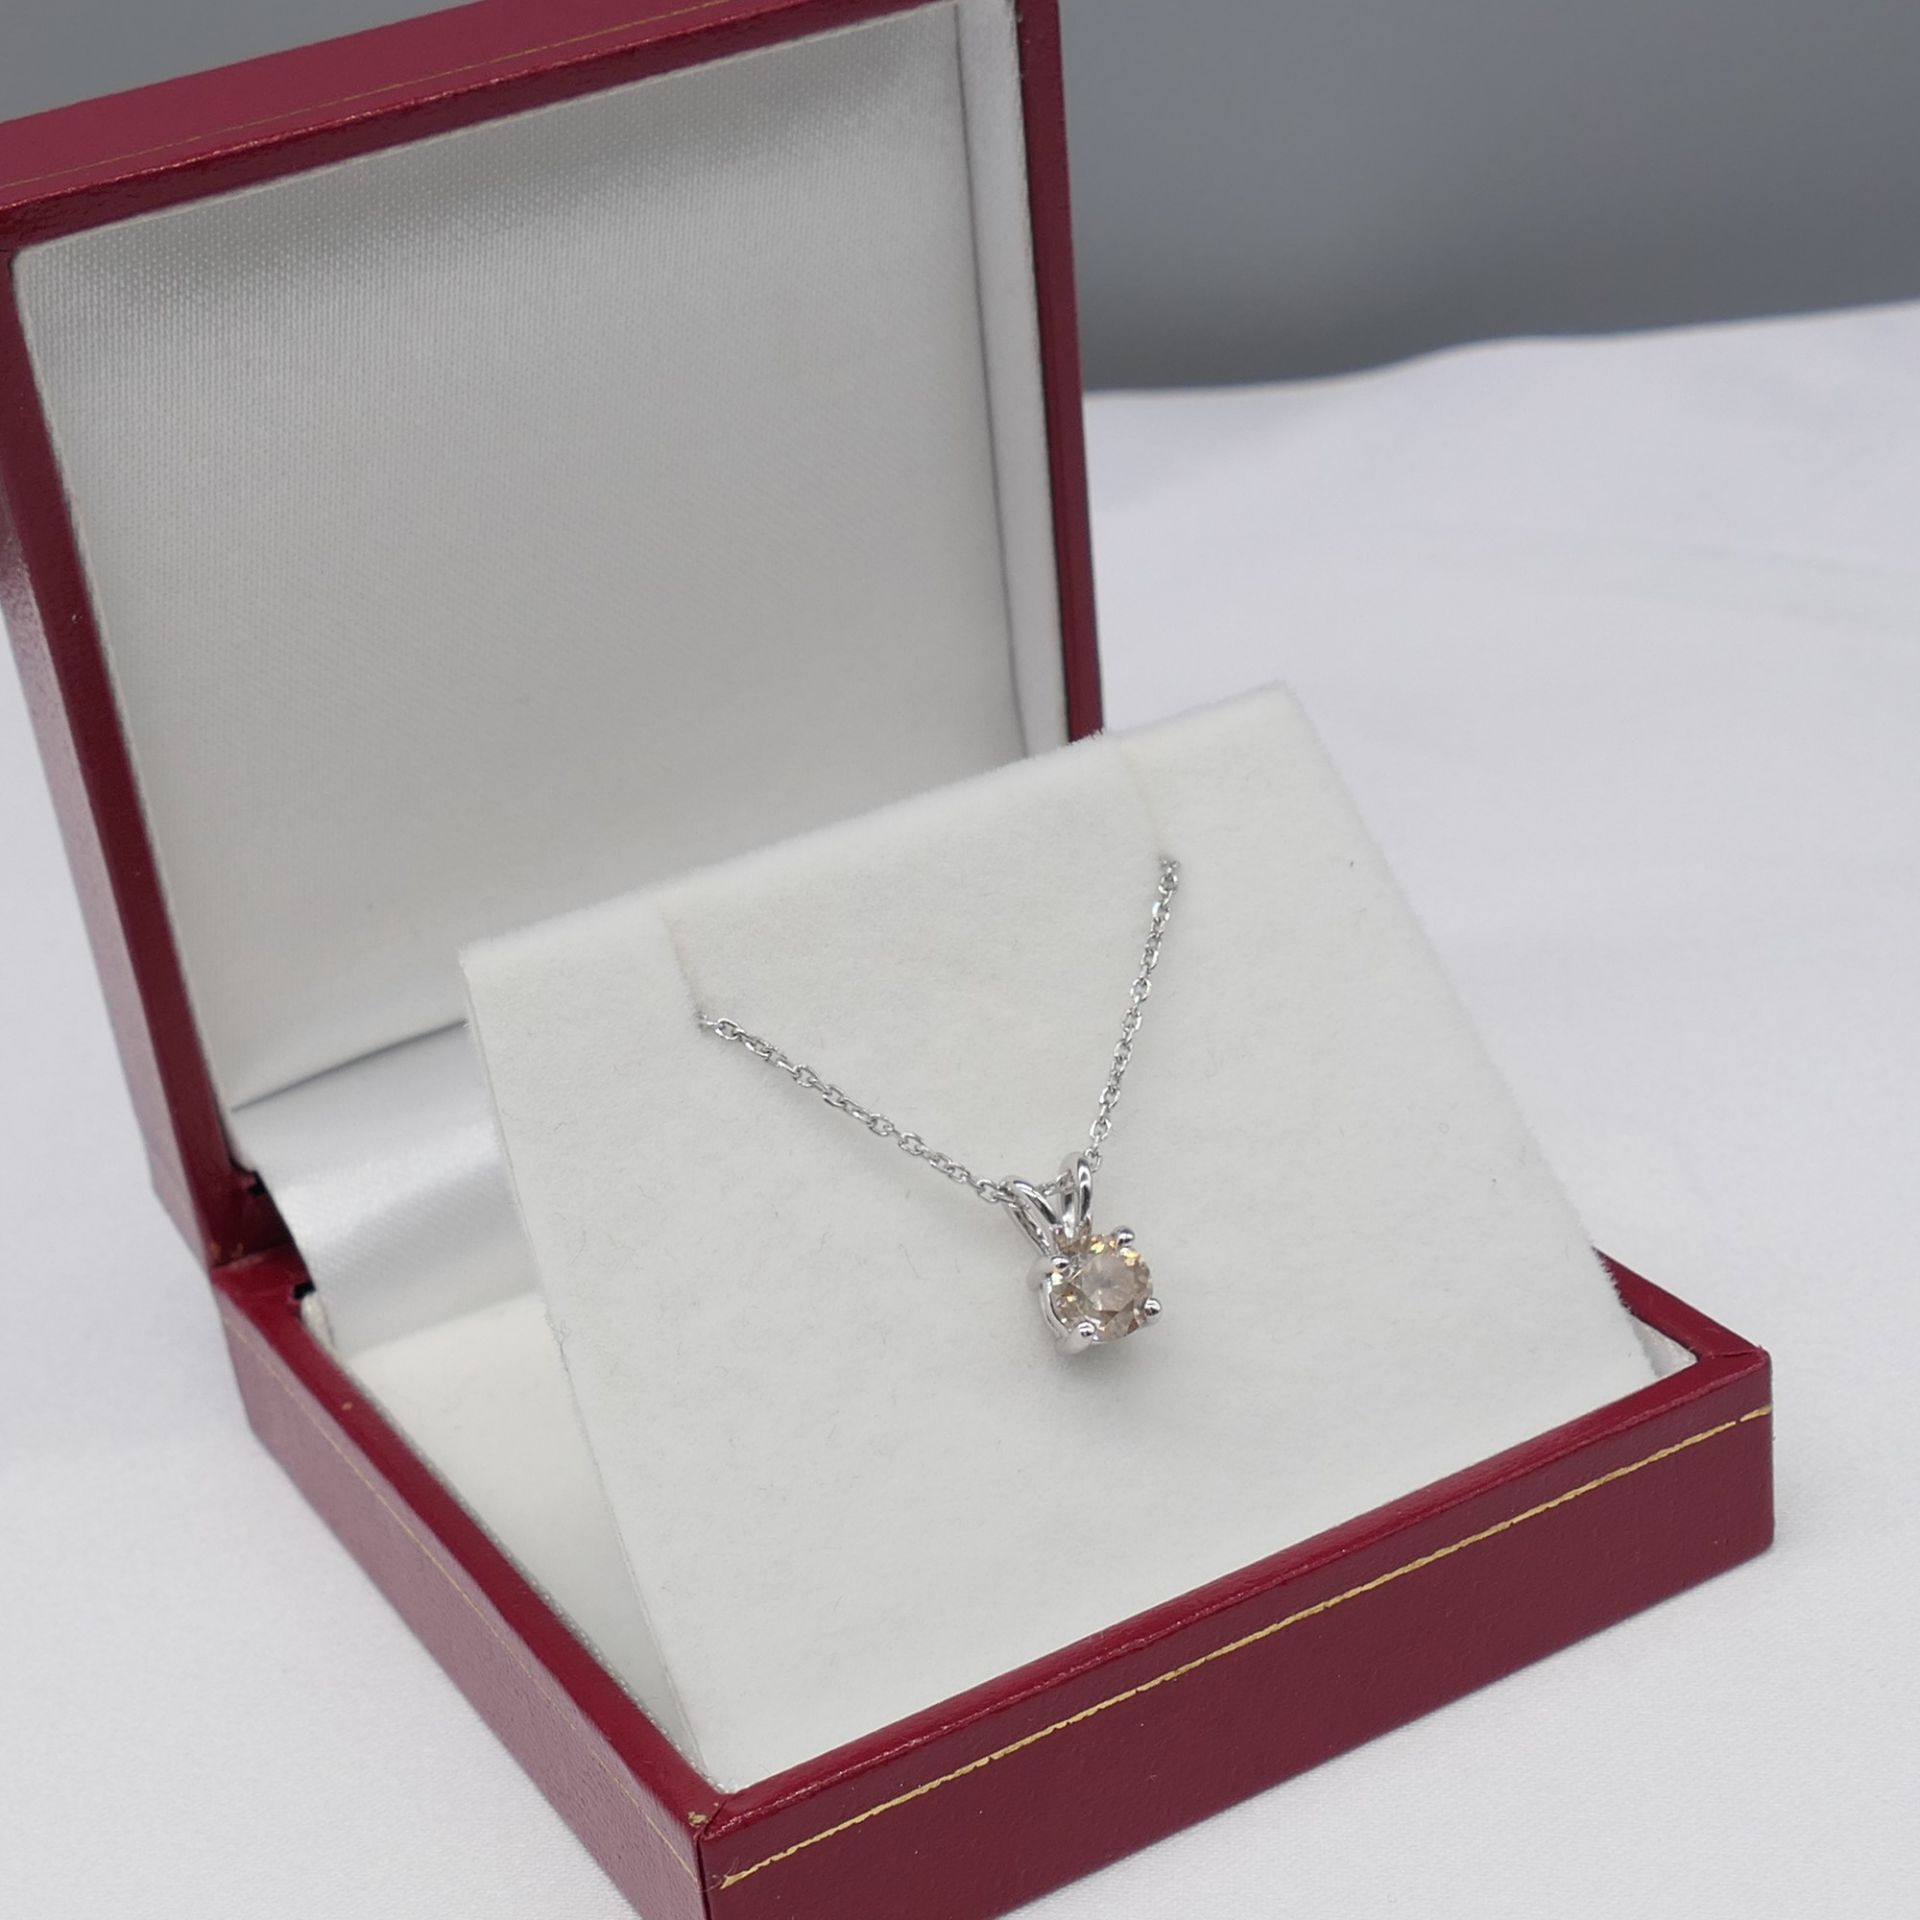 18ct White Gold 0.74 Carat Diamond Solitaire Pendant With Chain, Boxed - Image 5 of 7